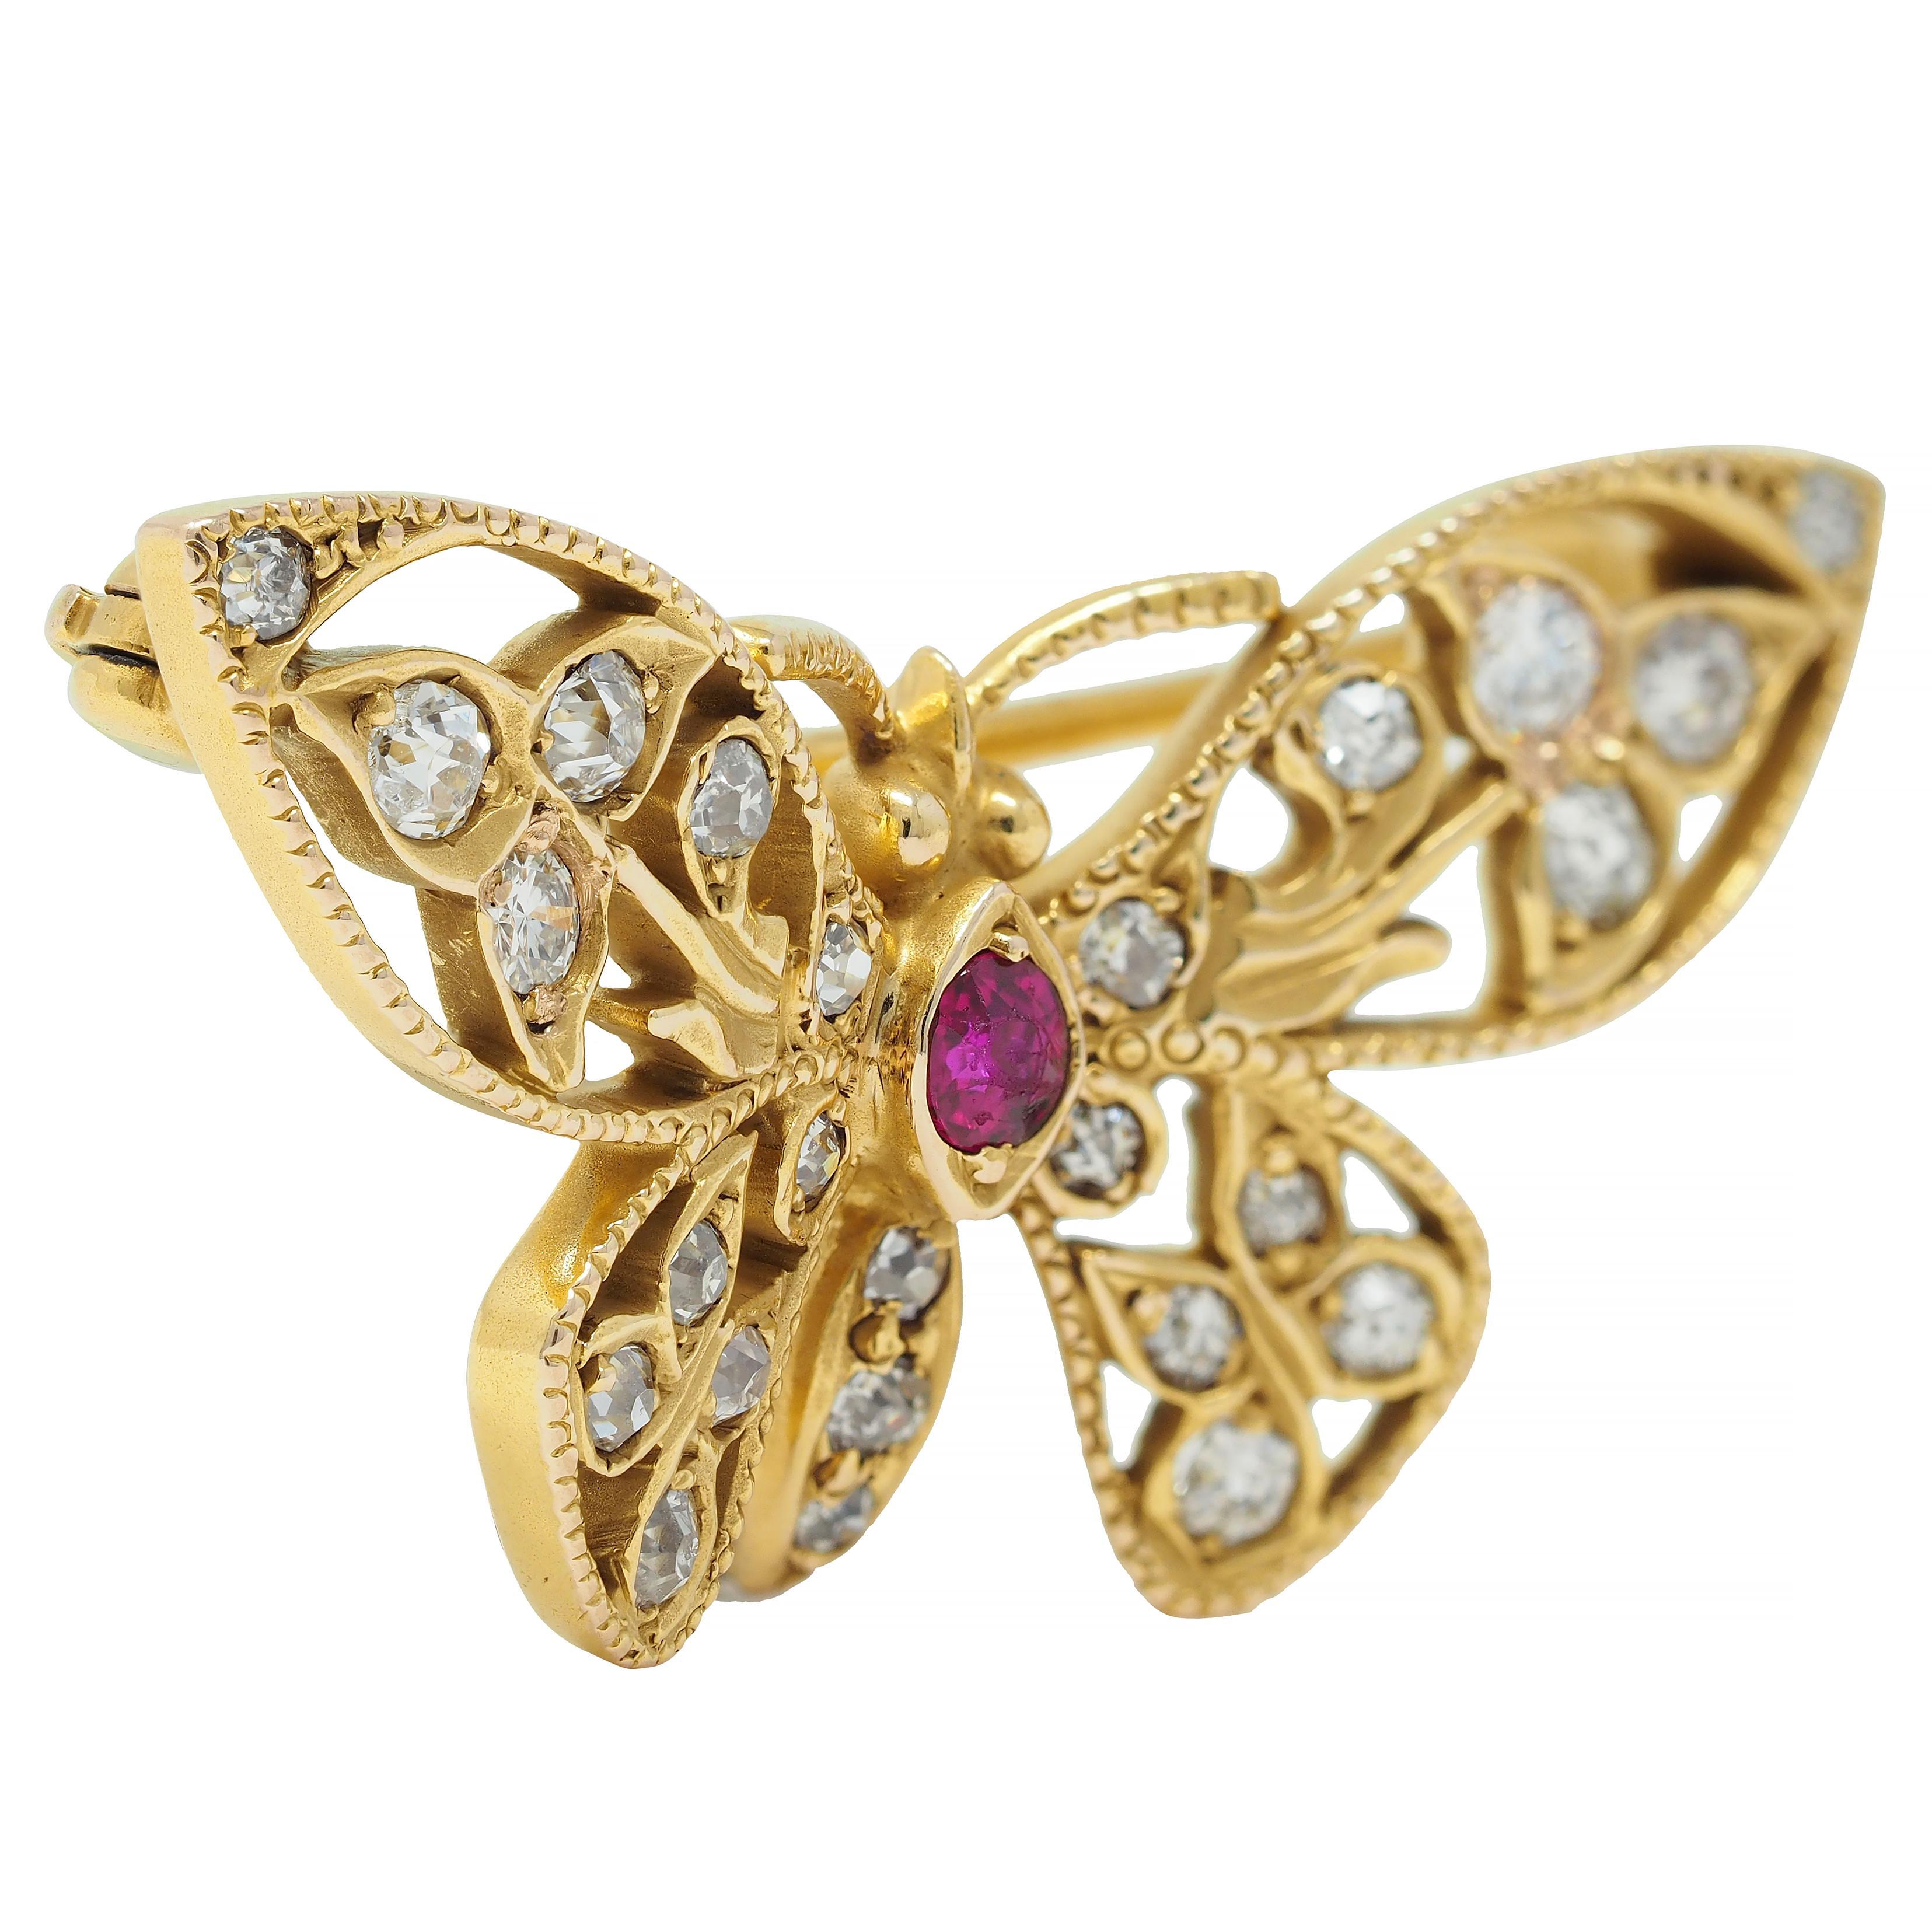 Designed as a stylized butterfly with pierced foliate motif wings with milgrain detail
Centering a round cut ruby body weighing approximately 0.14 carat - medium red
Accented by old European cut diamonds and one transitional bead set throughout